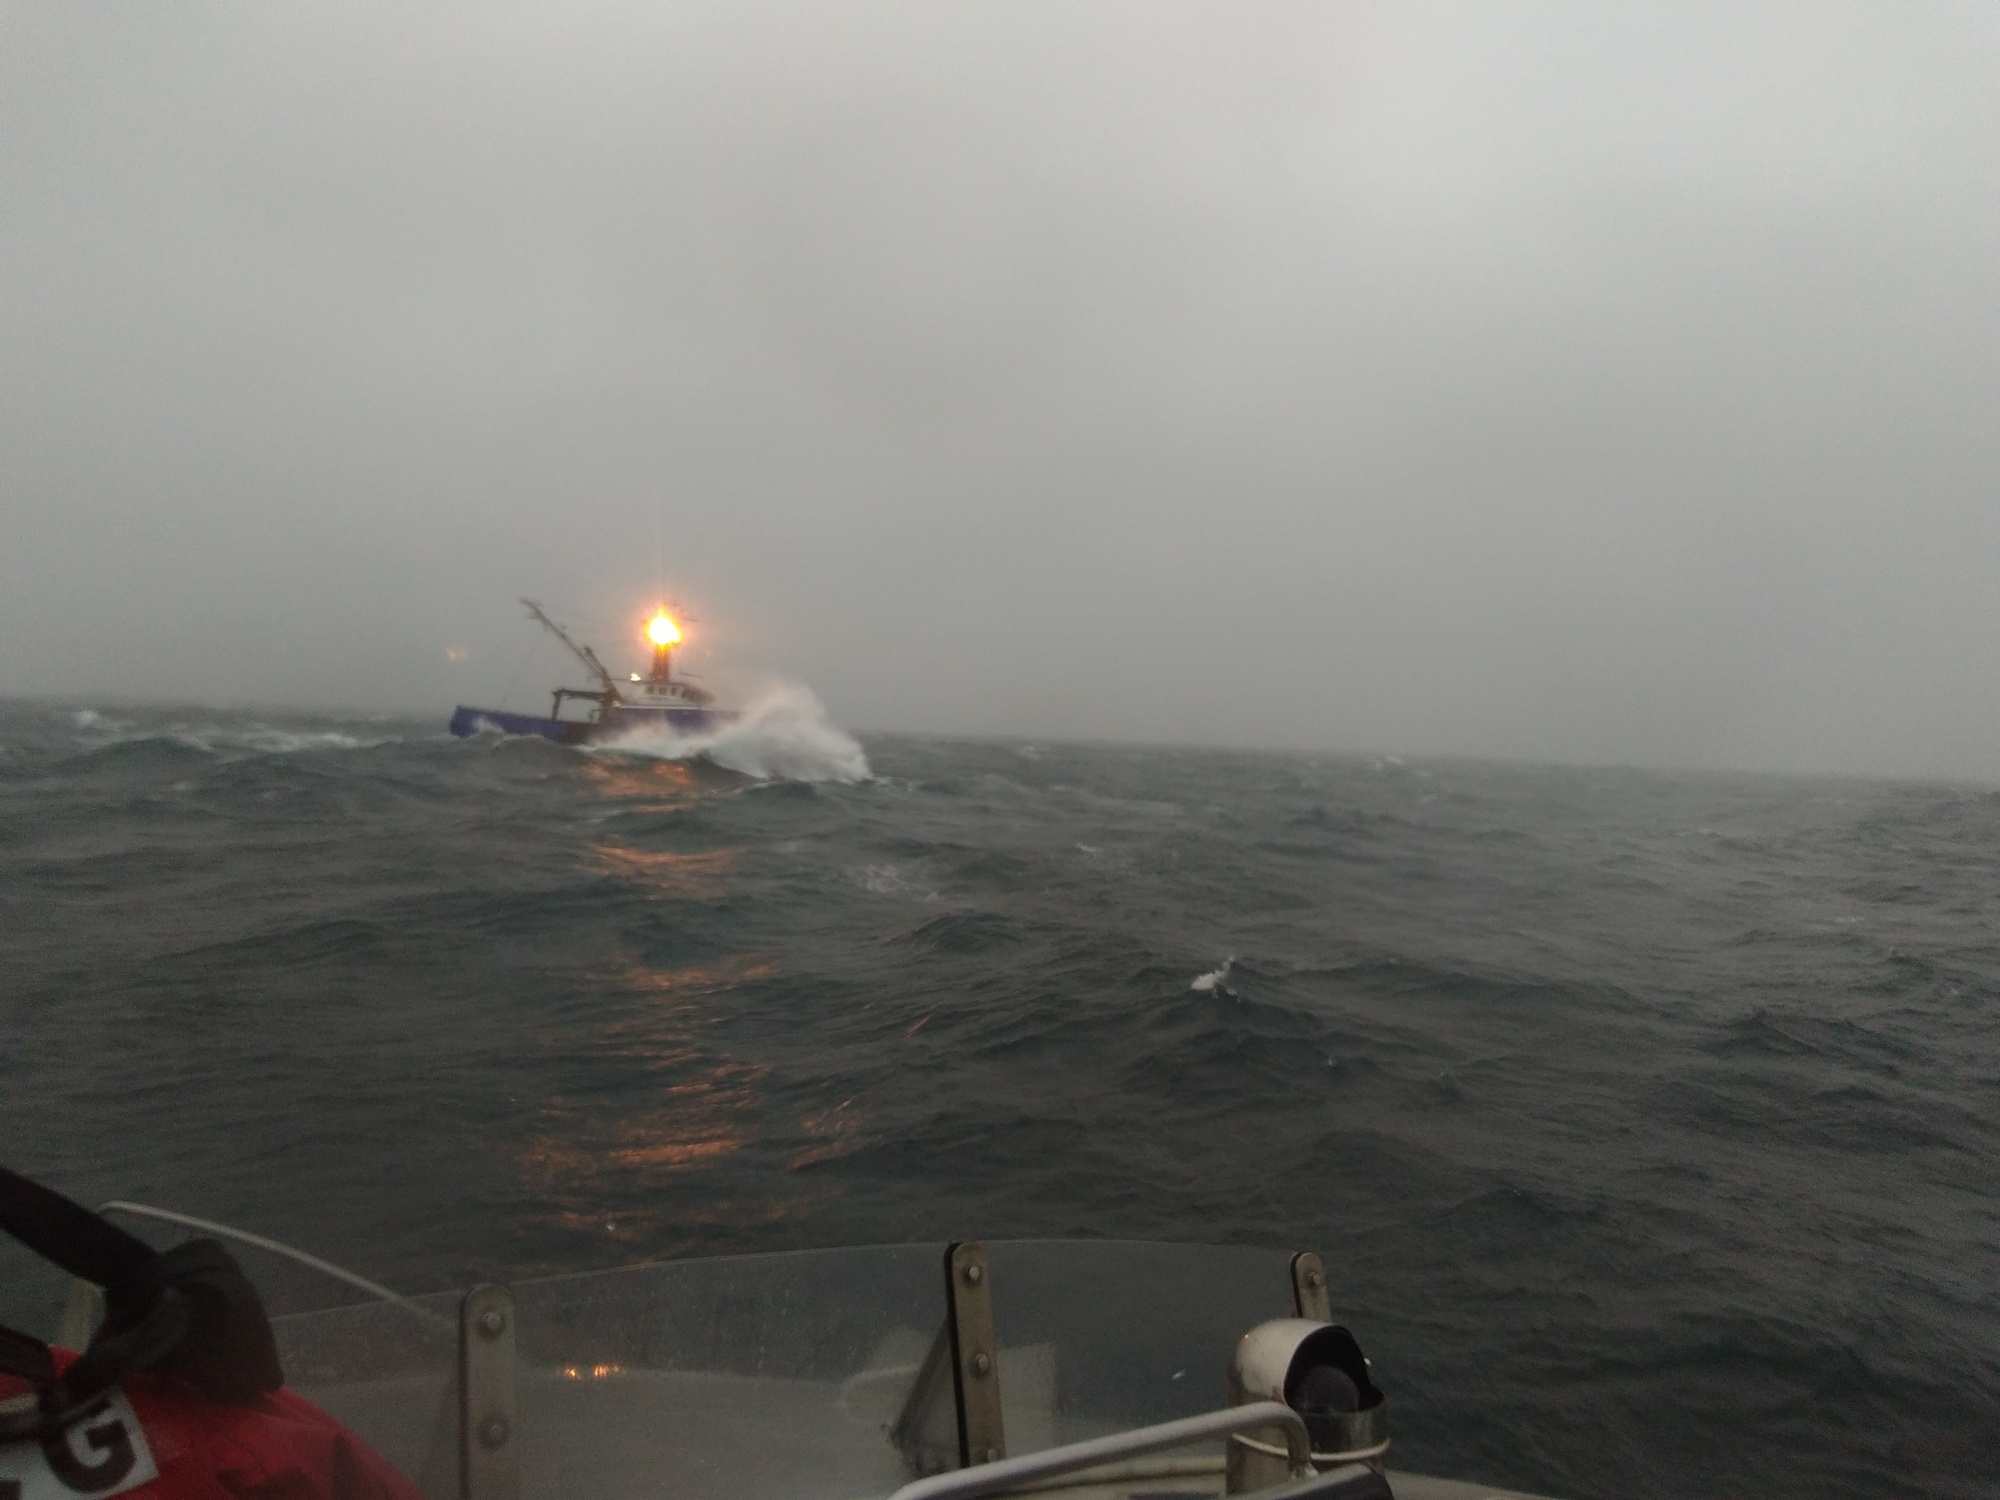 DVIDS - Images - Station Cape Disappointment 47-foot MLB [Image 1